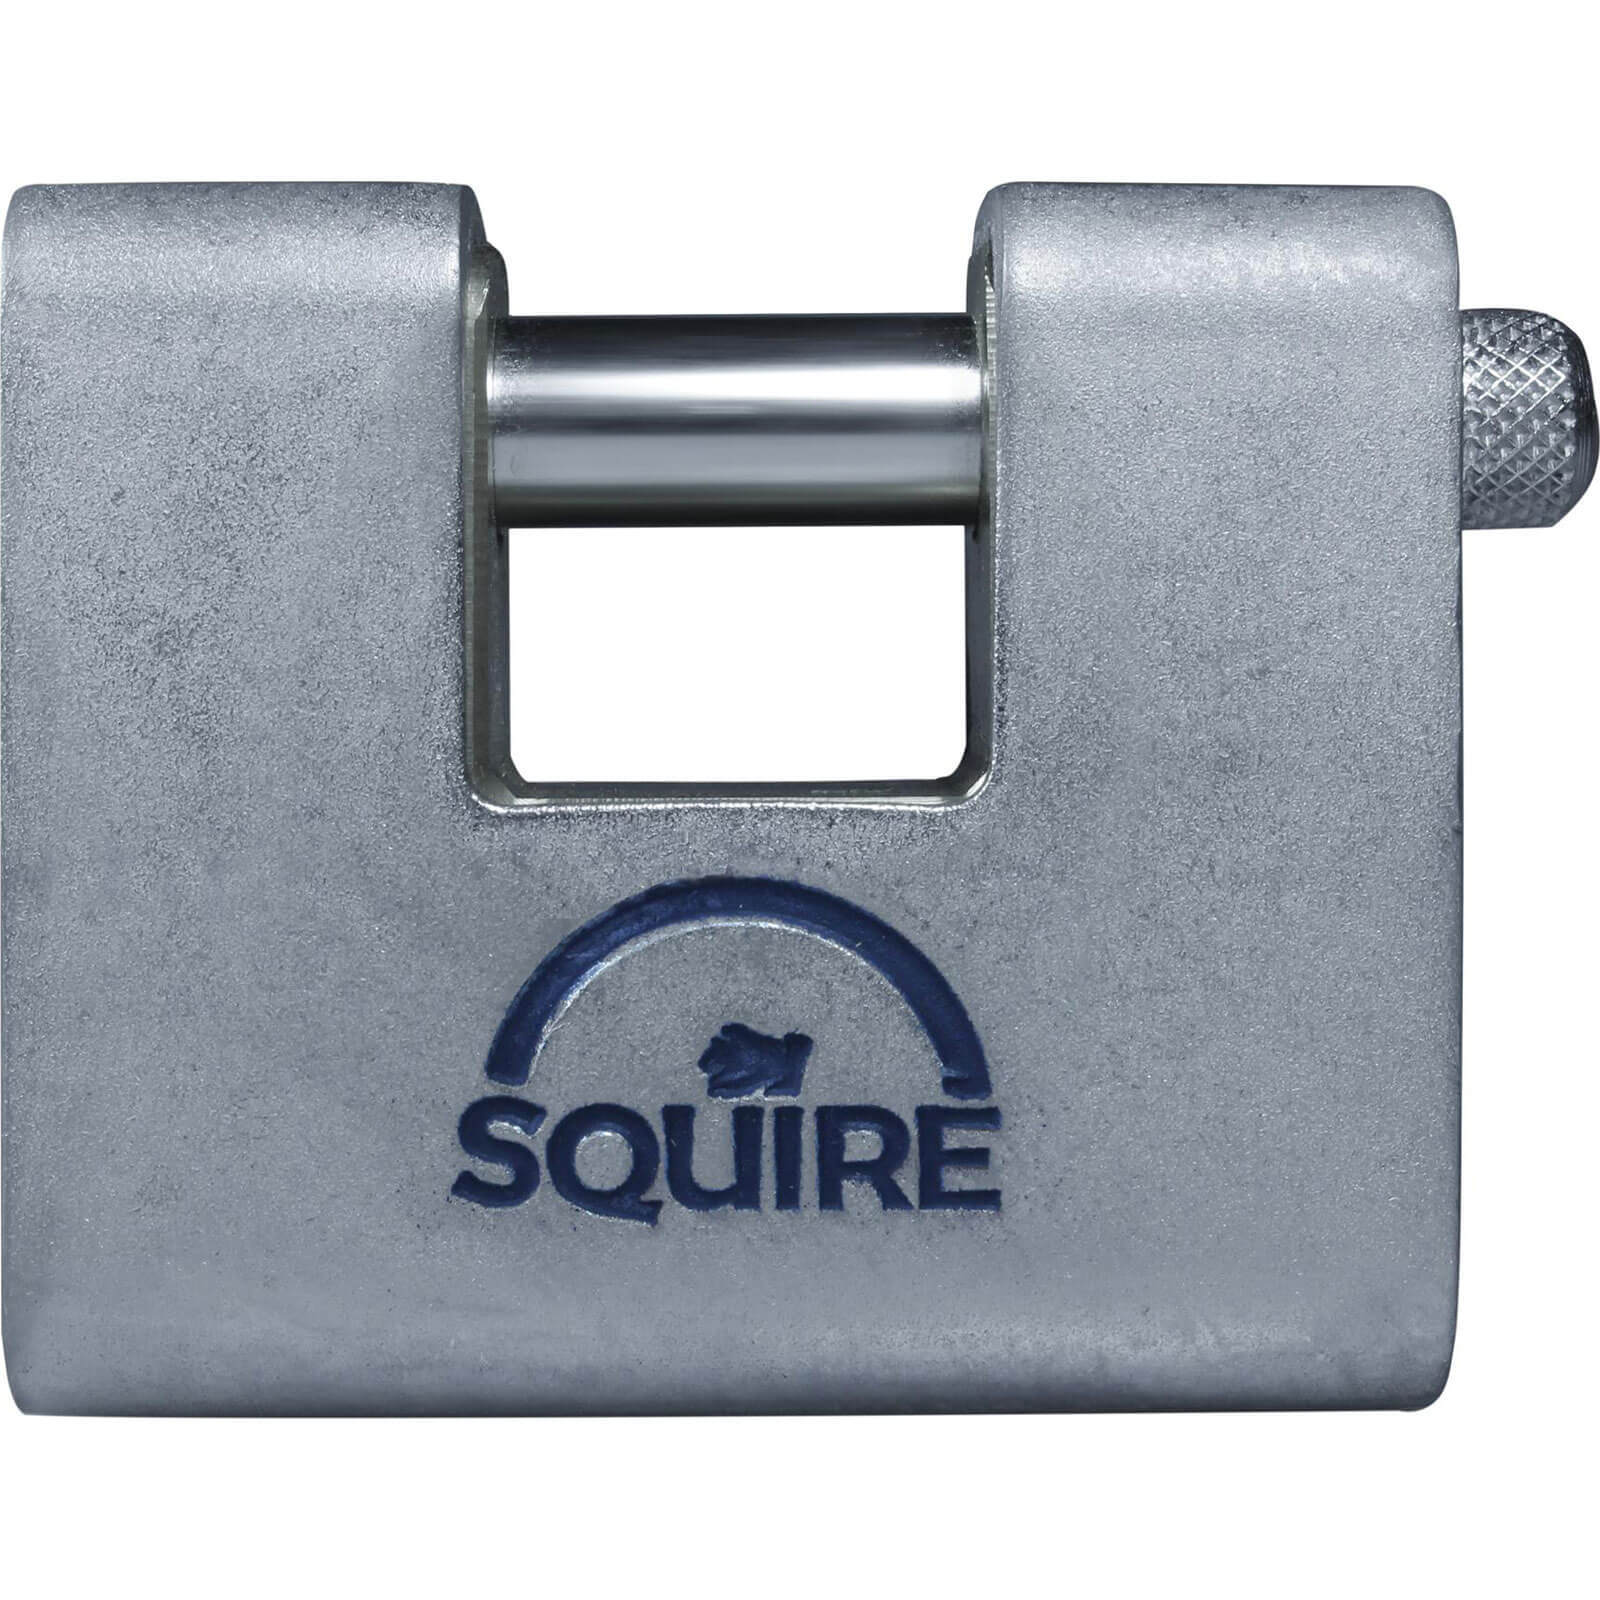 Photo of Squire Aswl Armoured Warehouse Padlock 60mm Standard